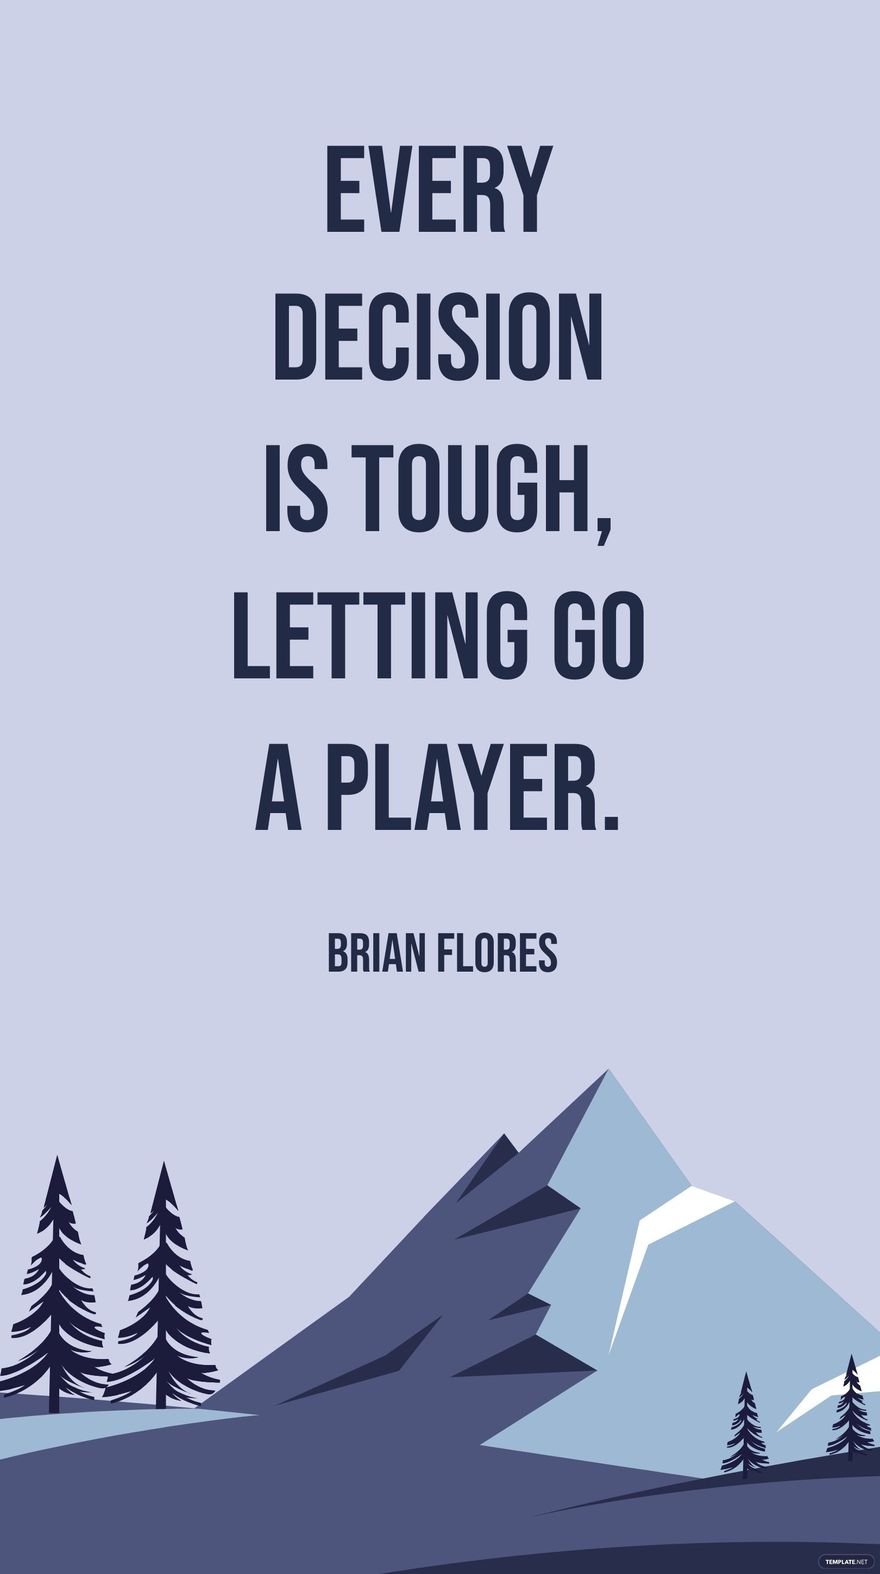 Brian Flores -Every decision is tough, letting go a player.